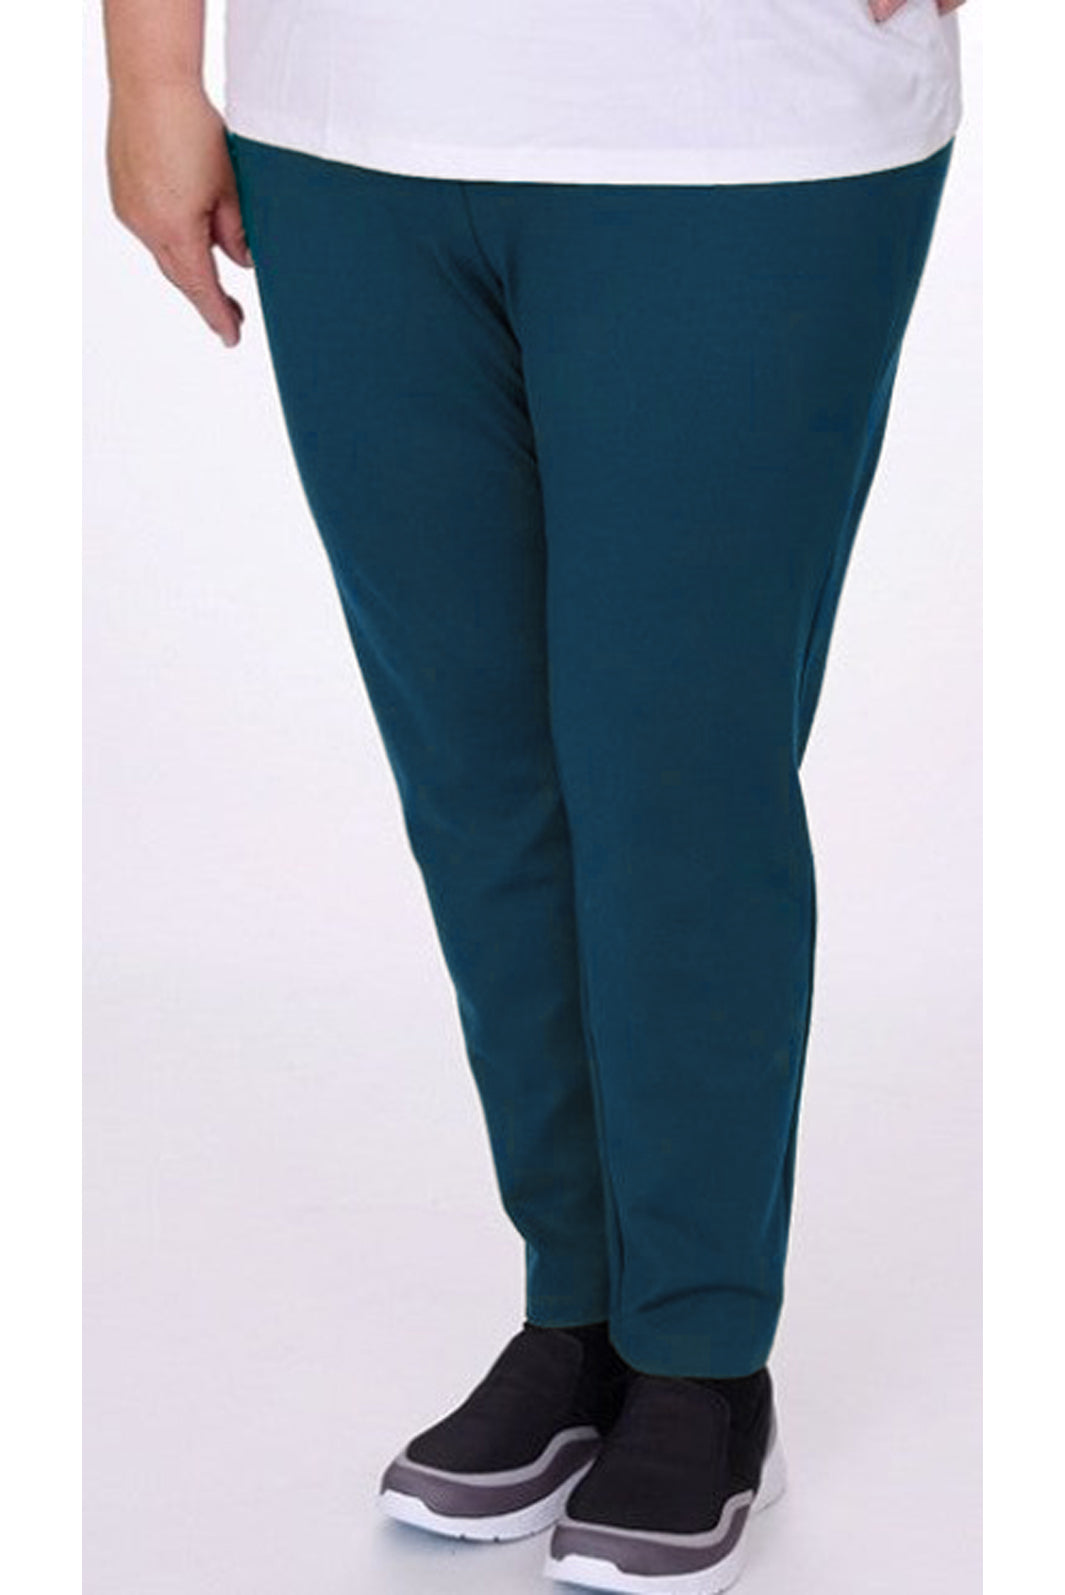 Chicory Chic Plus Size Pants by Sportive Plus